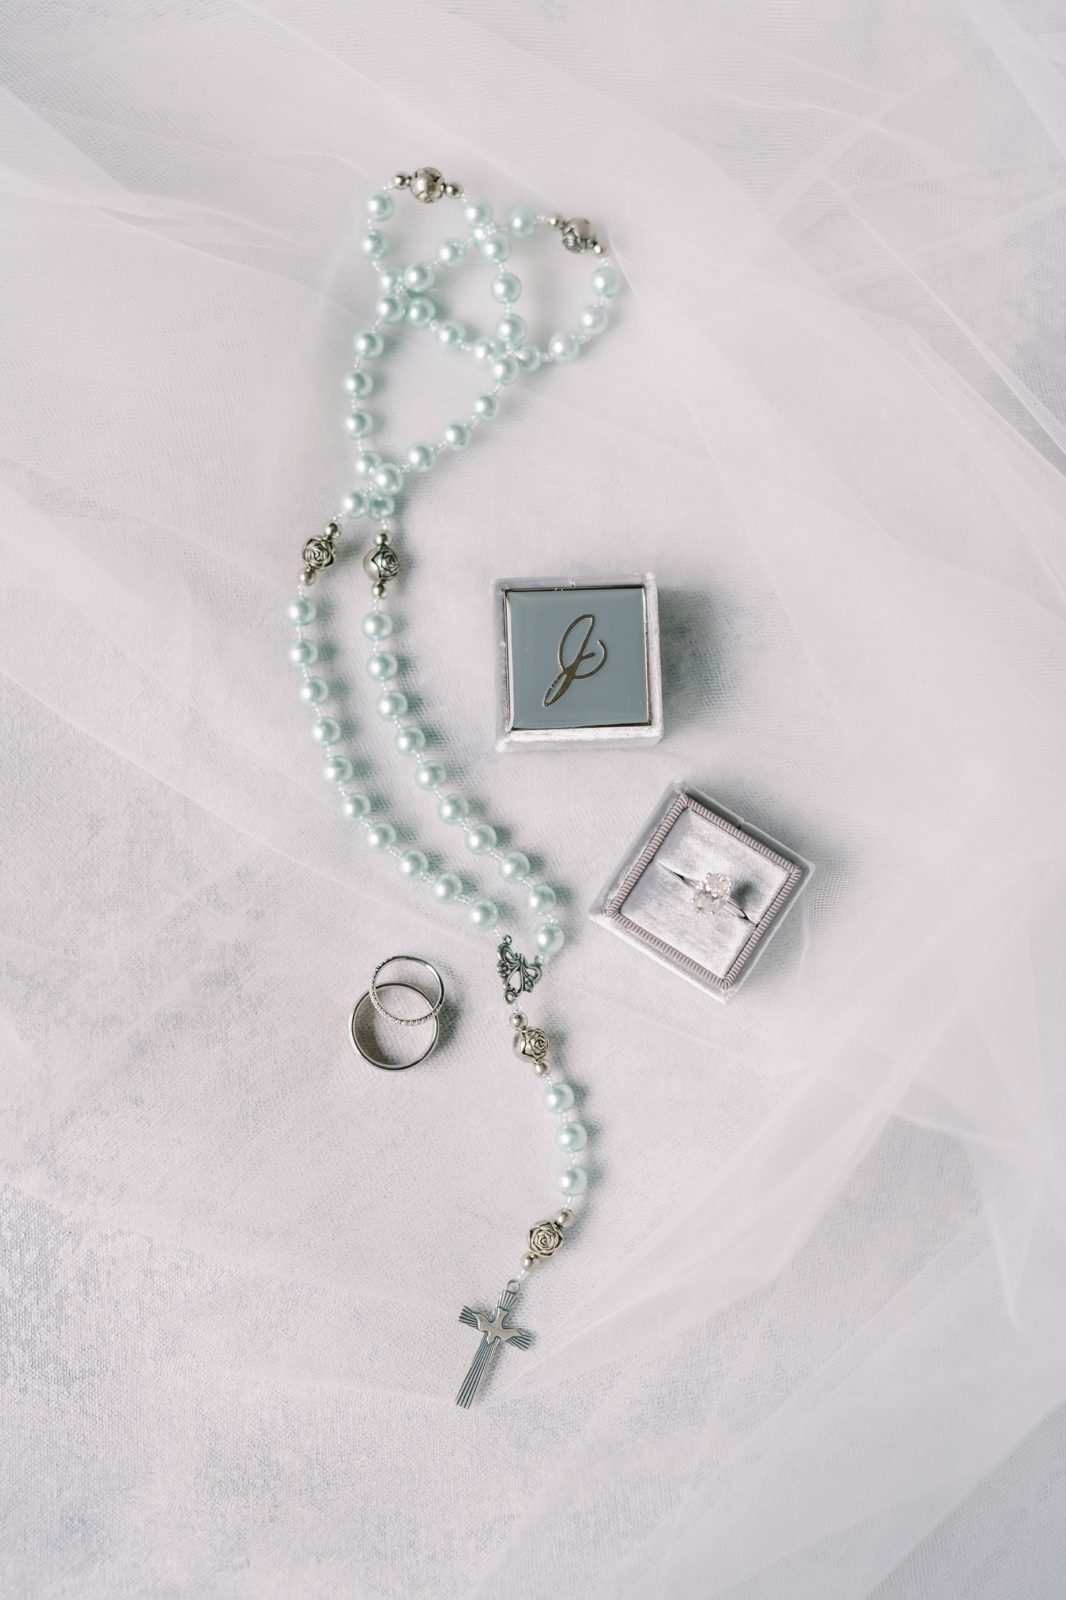 Light blue pearl cross necklace and wedding rings by Christina Elliott Photography in Houston. Wedding ring flat lay cross necklace #christinaelliottphotography #Houstonweddings #catholicchurchweddings #navyblue #sayIdo #Houstonweddingphotographers